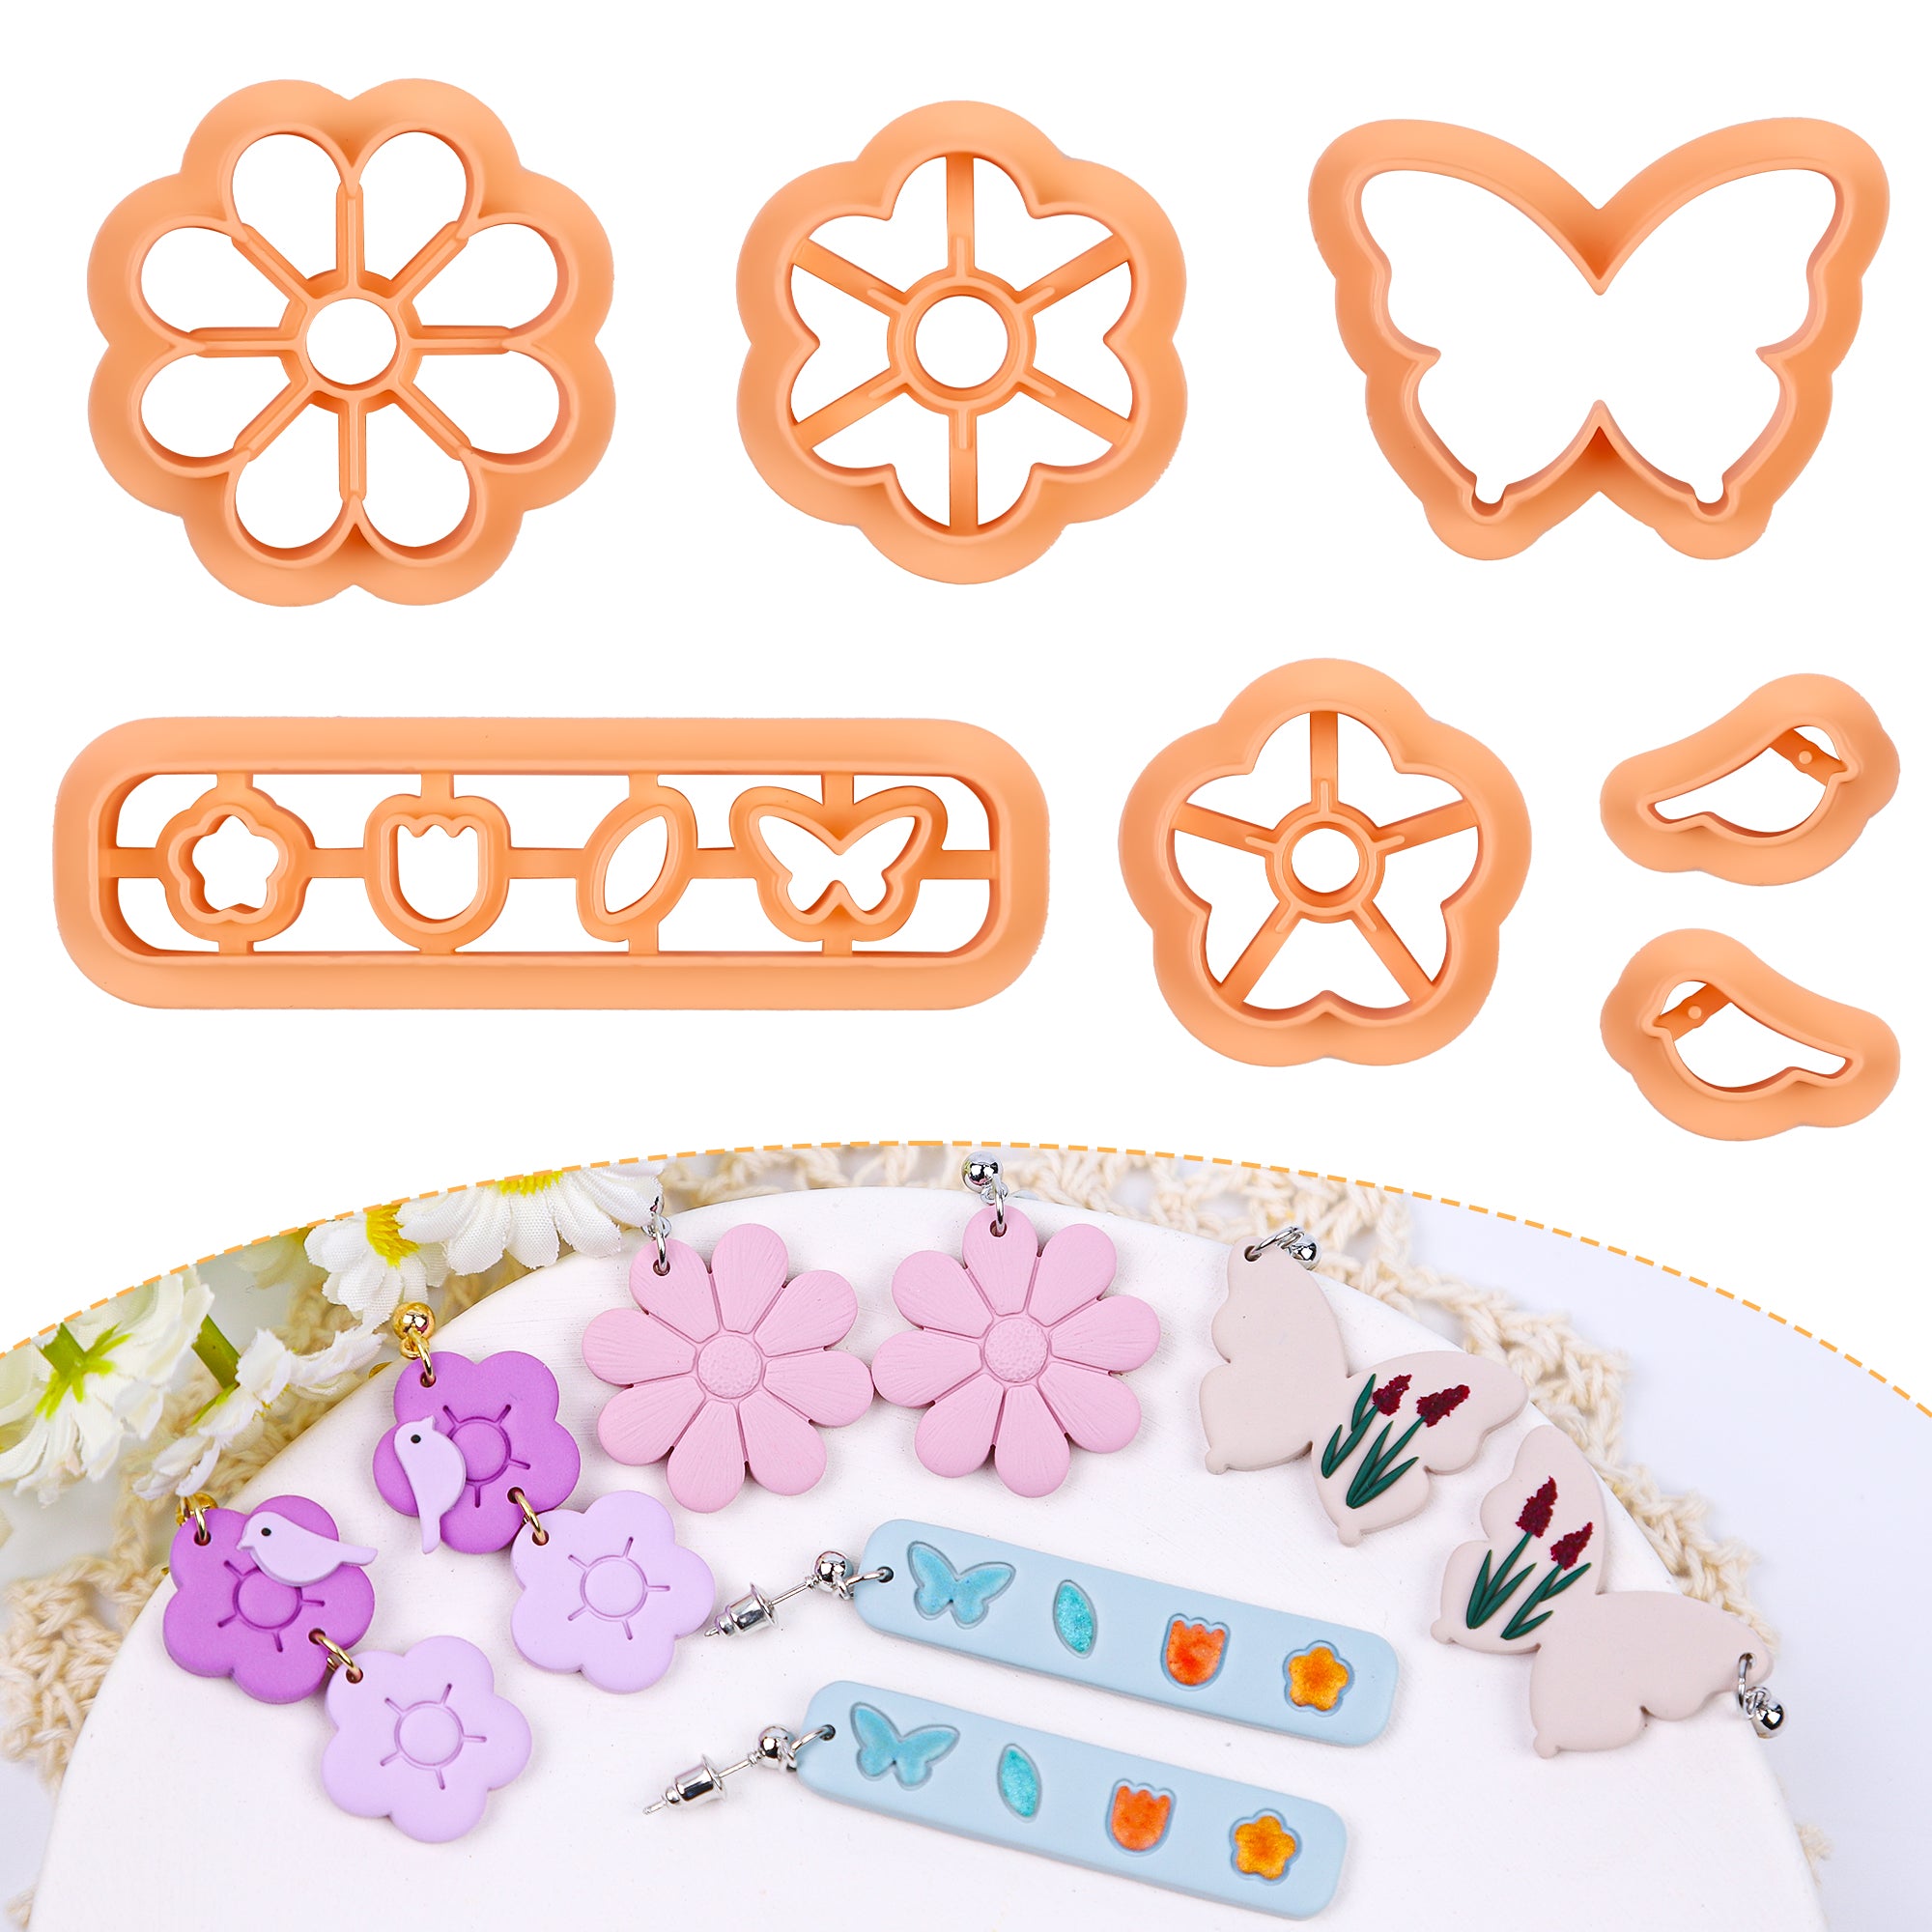 Puocaon Spring Polymer Clay Cutters 7 Pcs